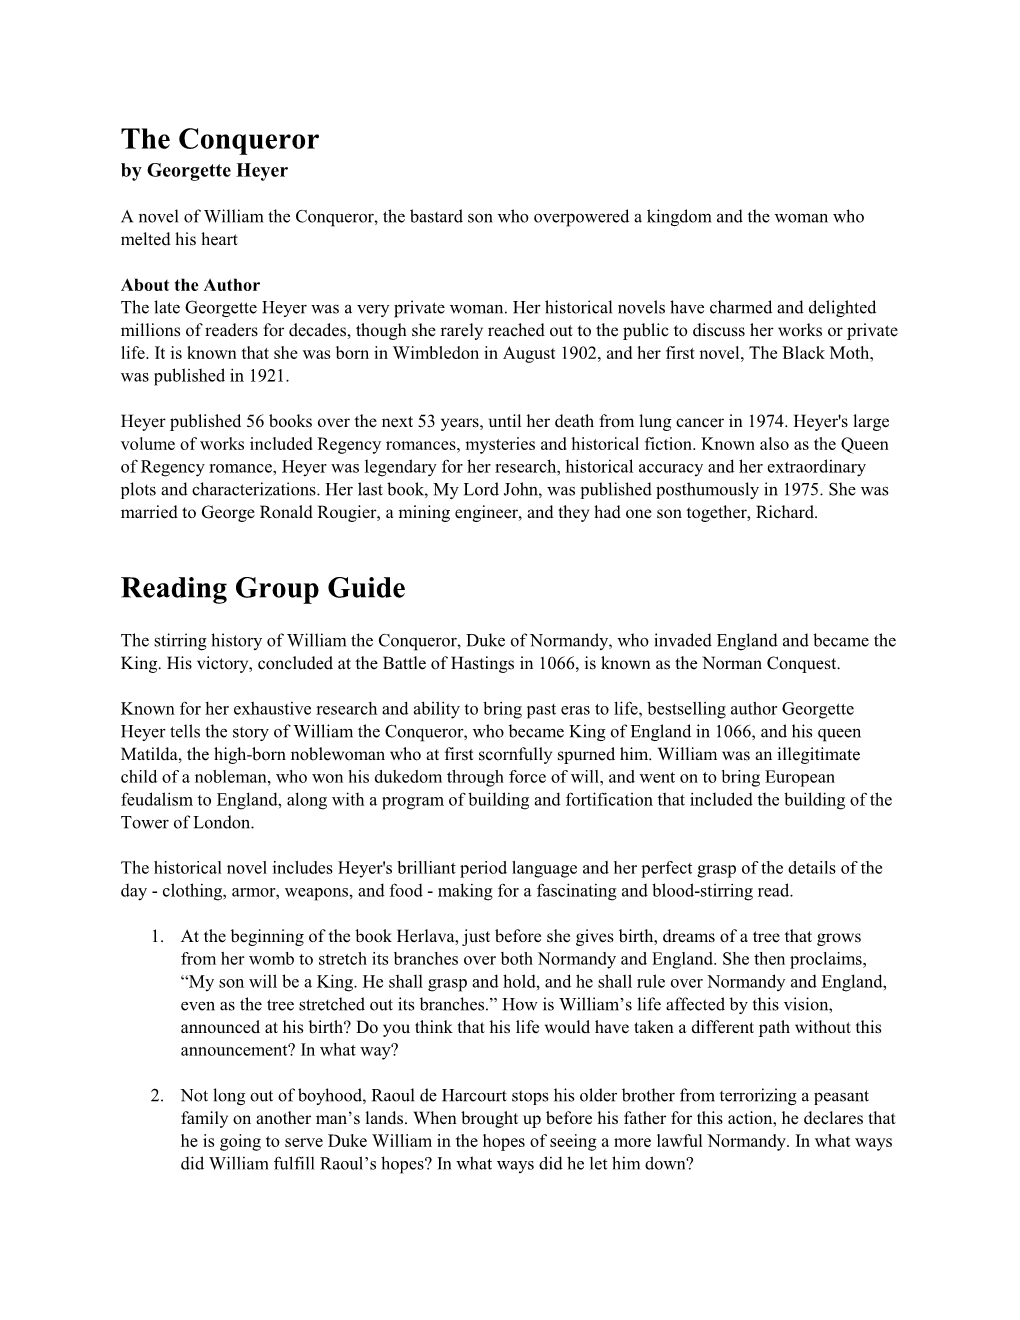 The Conqueror Reading Group Guide